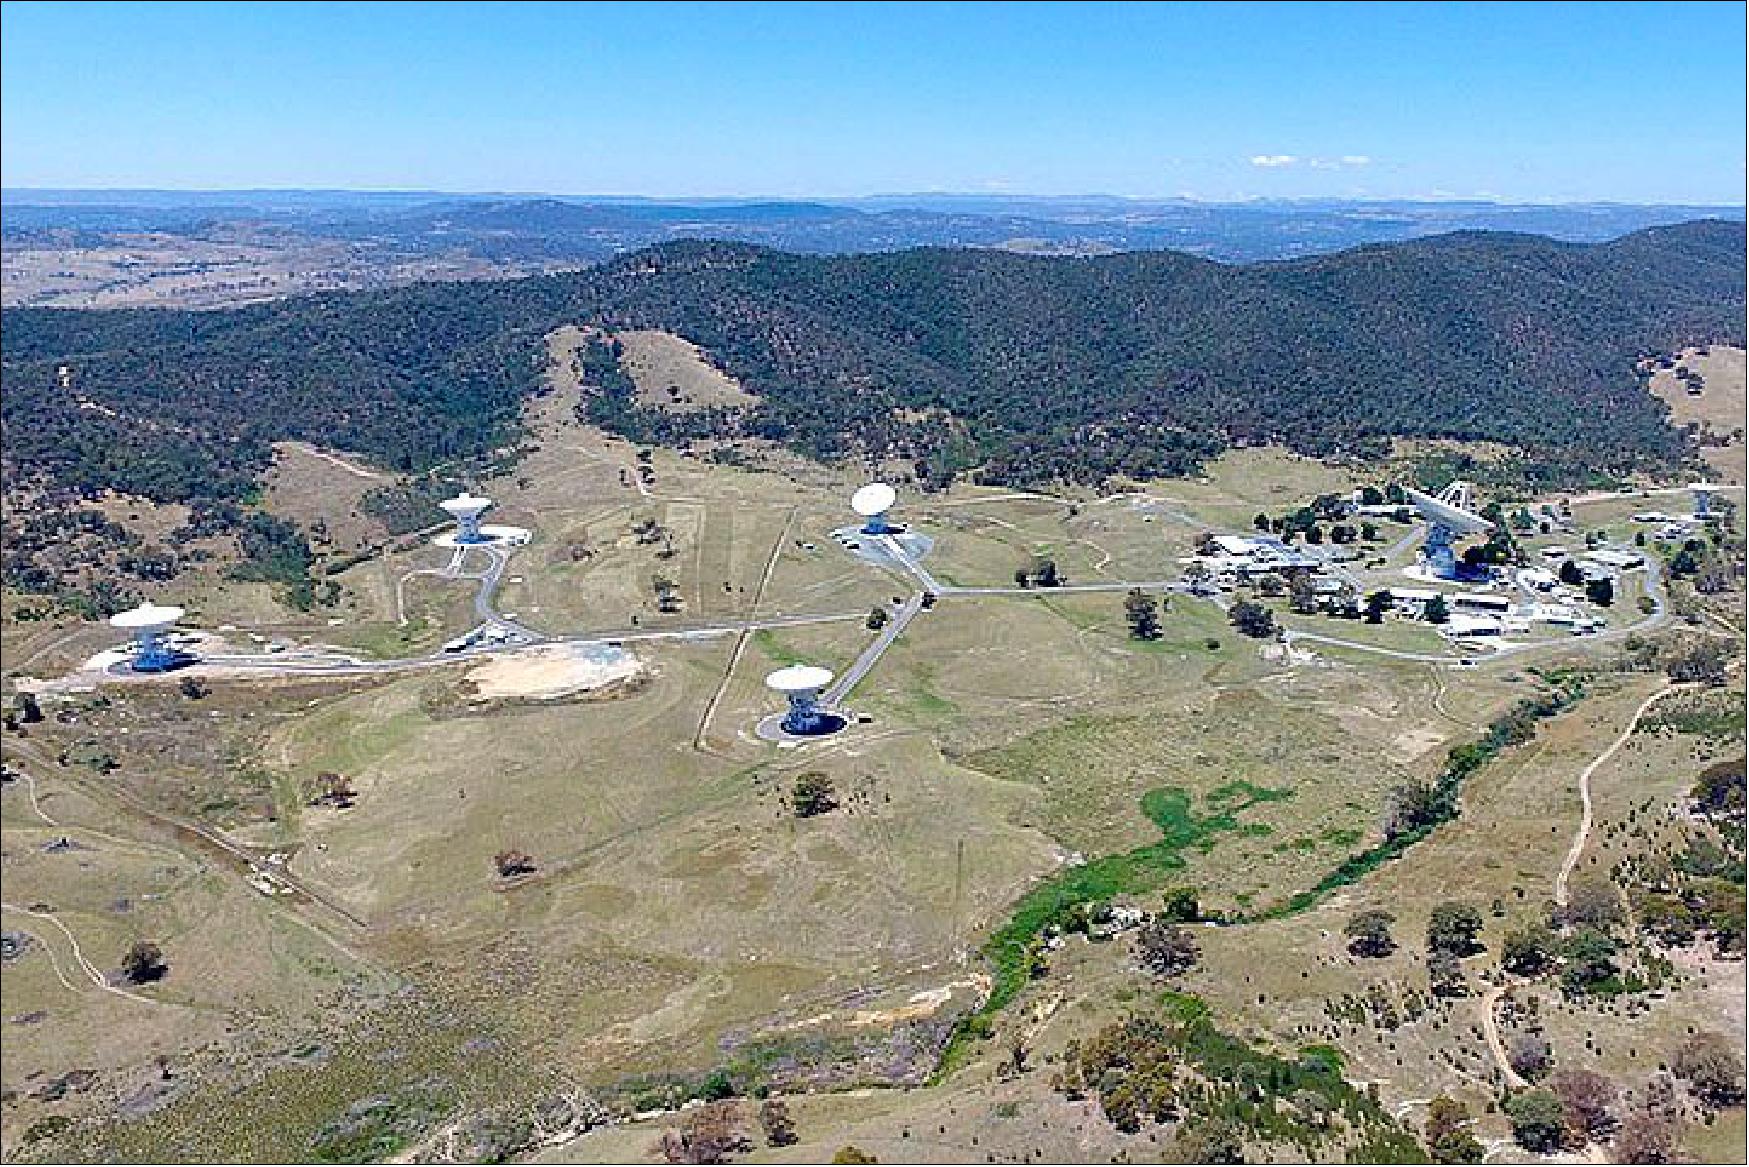 Figure 112: Photo of the Canberra DSN site (image credit: DSN. DSN is a service of NASA’s Space Communications and Navigation Program (SCaN) within the agency’s Human Exploration and Operations Mission Directorate)